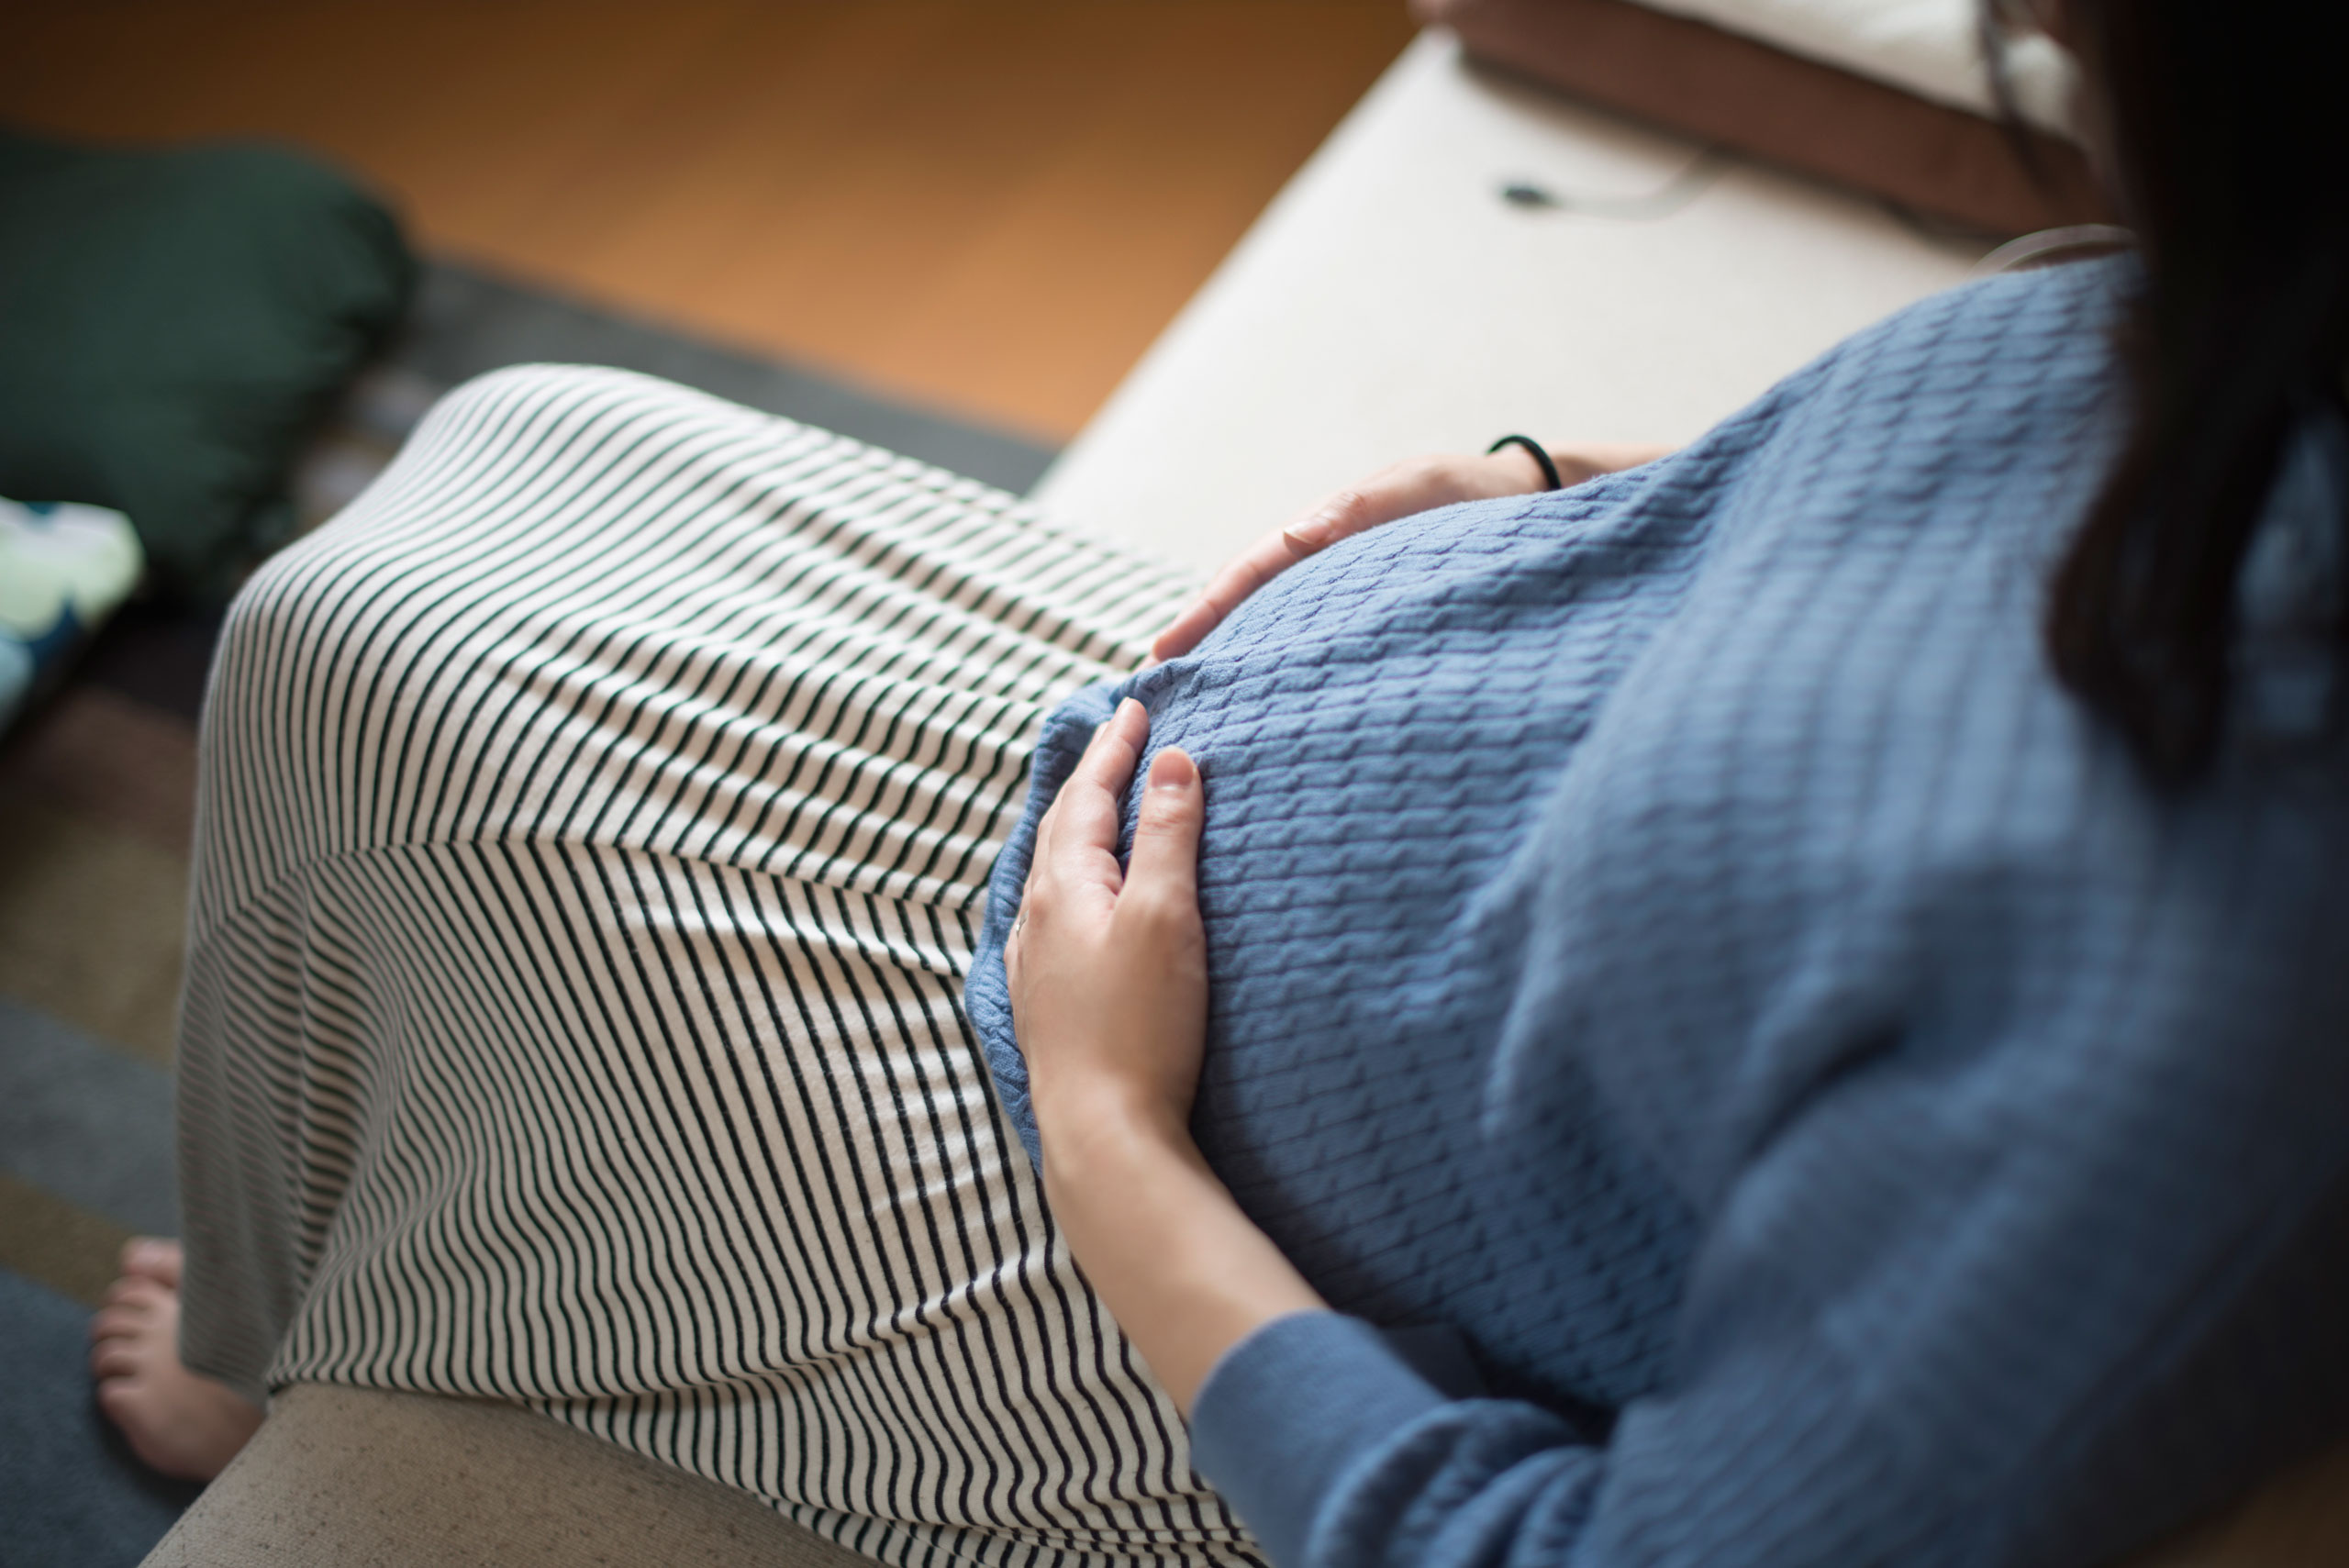 Surrogate Maternity in Ukraine And Understanding The Country's Law Encouraging Surrogacy